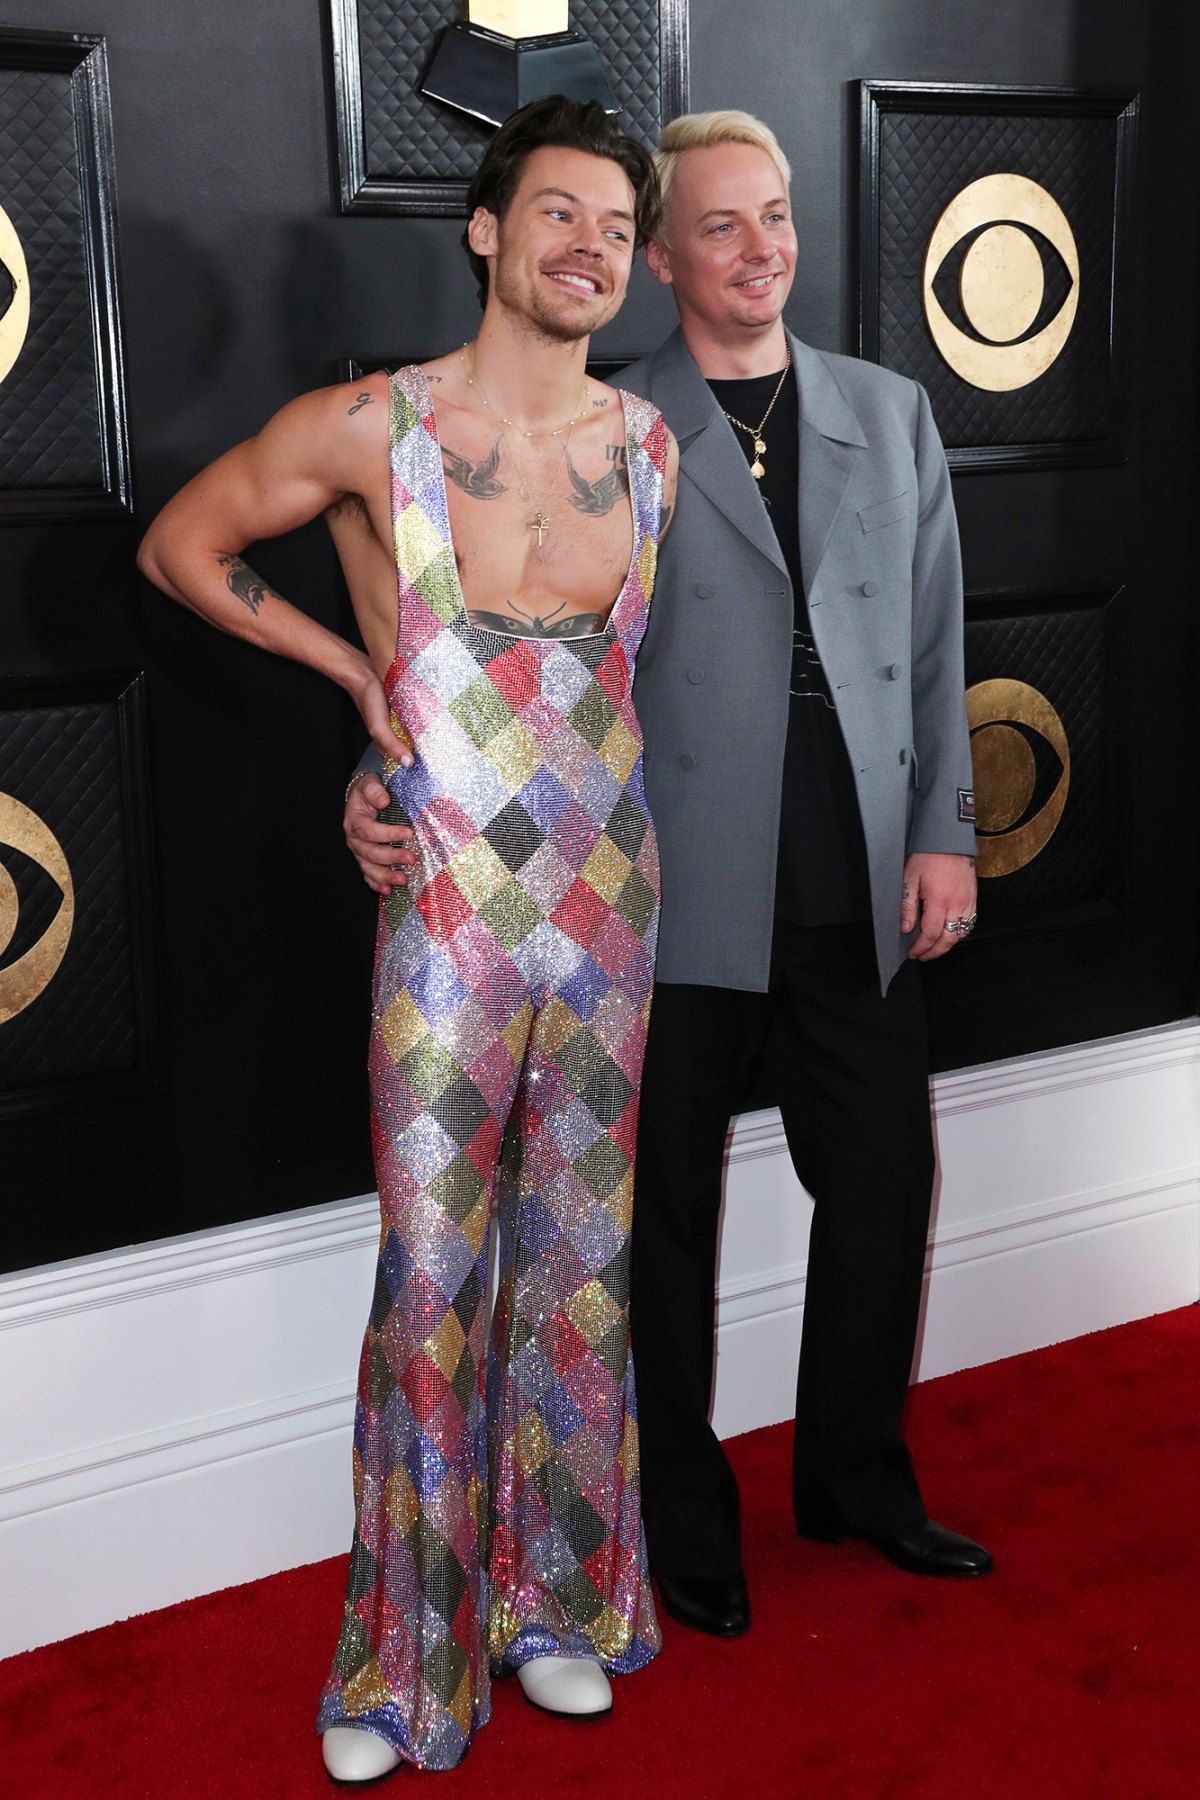 See Every Showstopping Look From the 2023 Grammys Red Carpet